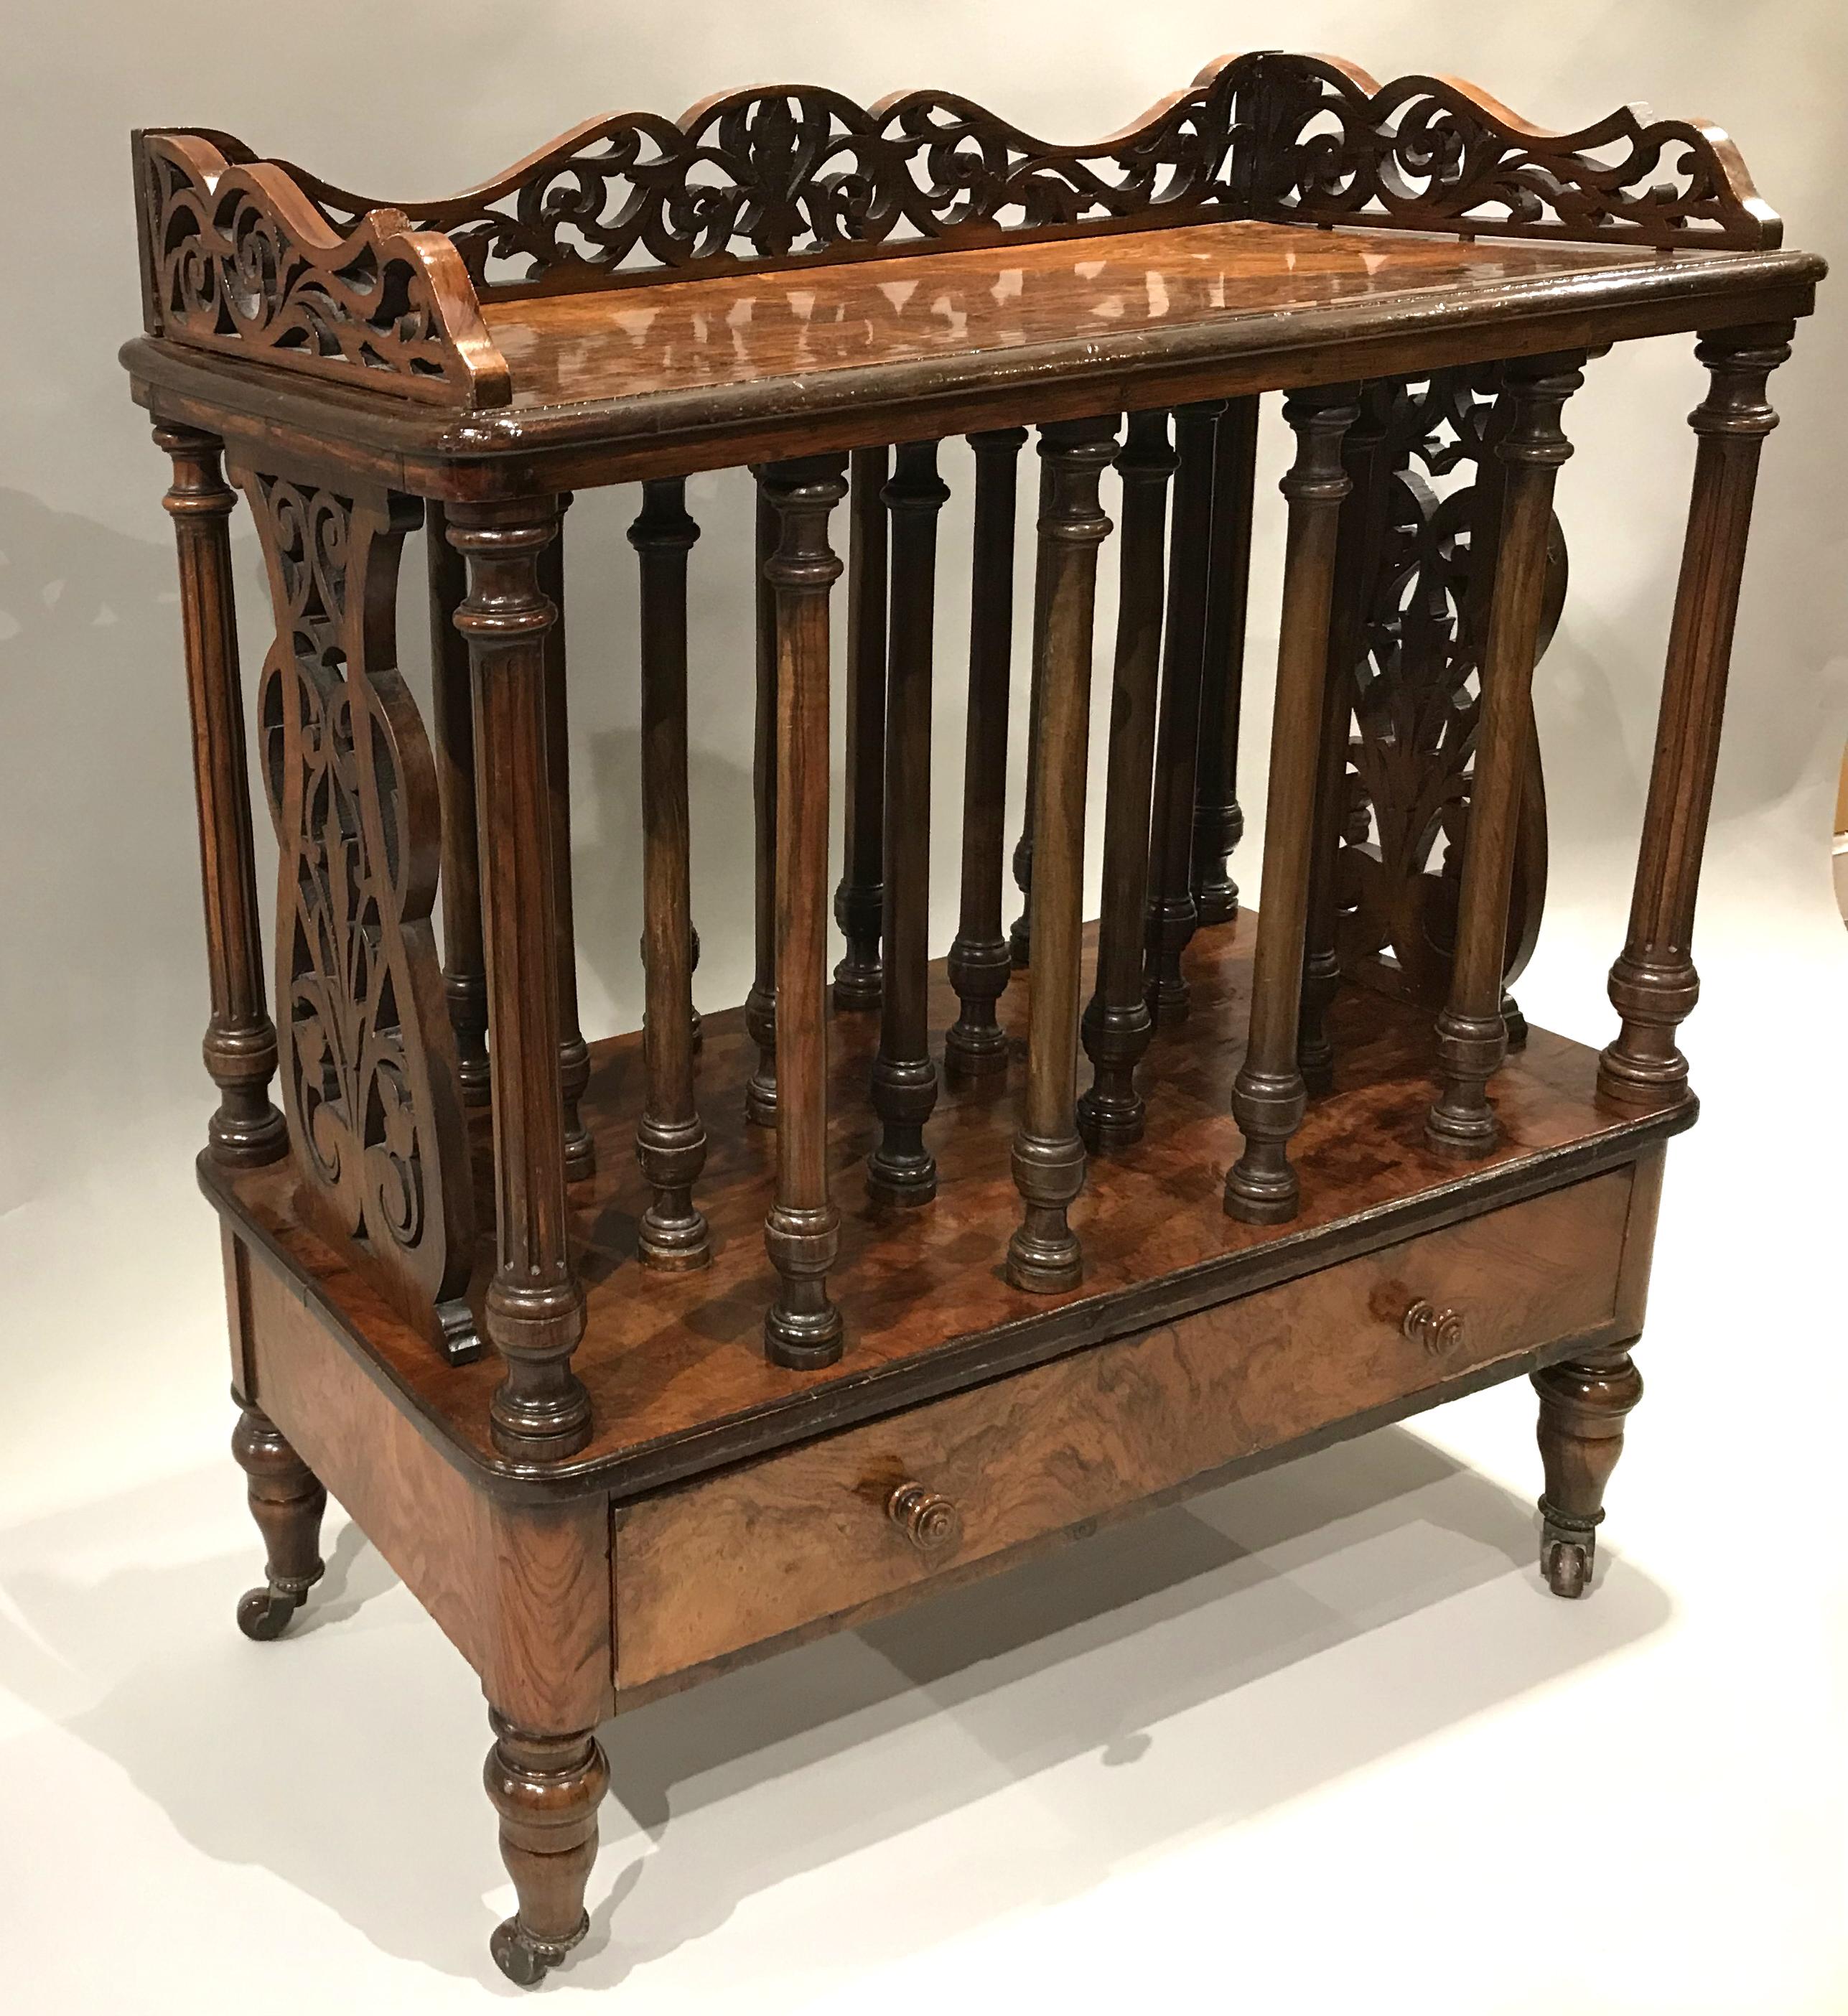 A fine English William IV burled walnut Canterbury with single lower drawer, splendid pierce carved lyre ends and gallery, turned central column dividers, all supported on turned legs with porcelain casters. Dates to the late 18th or early 19th